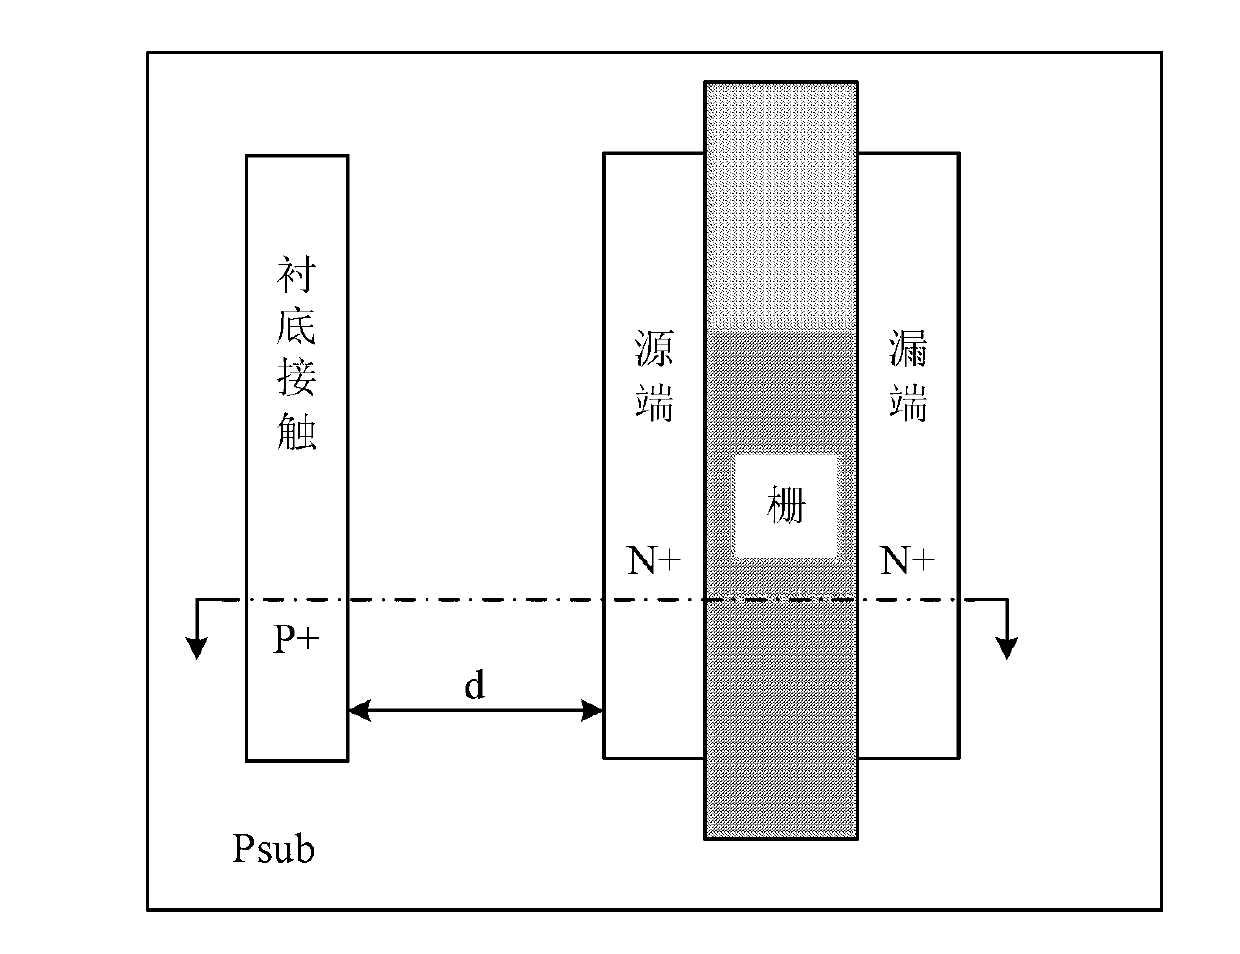 MOS (Metal Oxide Semiconductor) device for ESD (Electrostatic Discharge) protection of integrated circuit chip